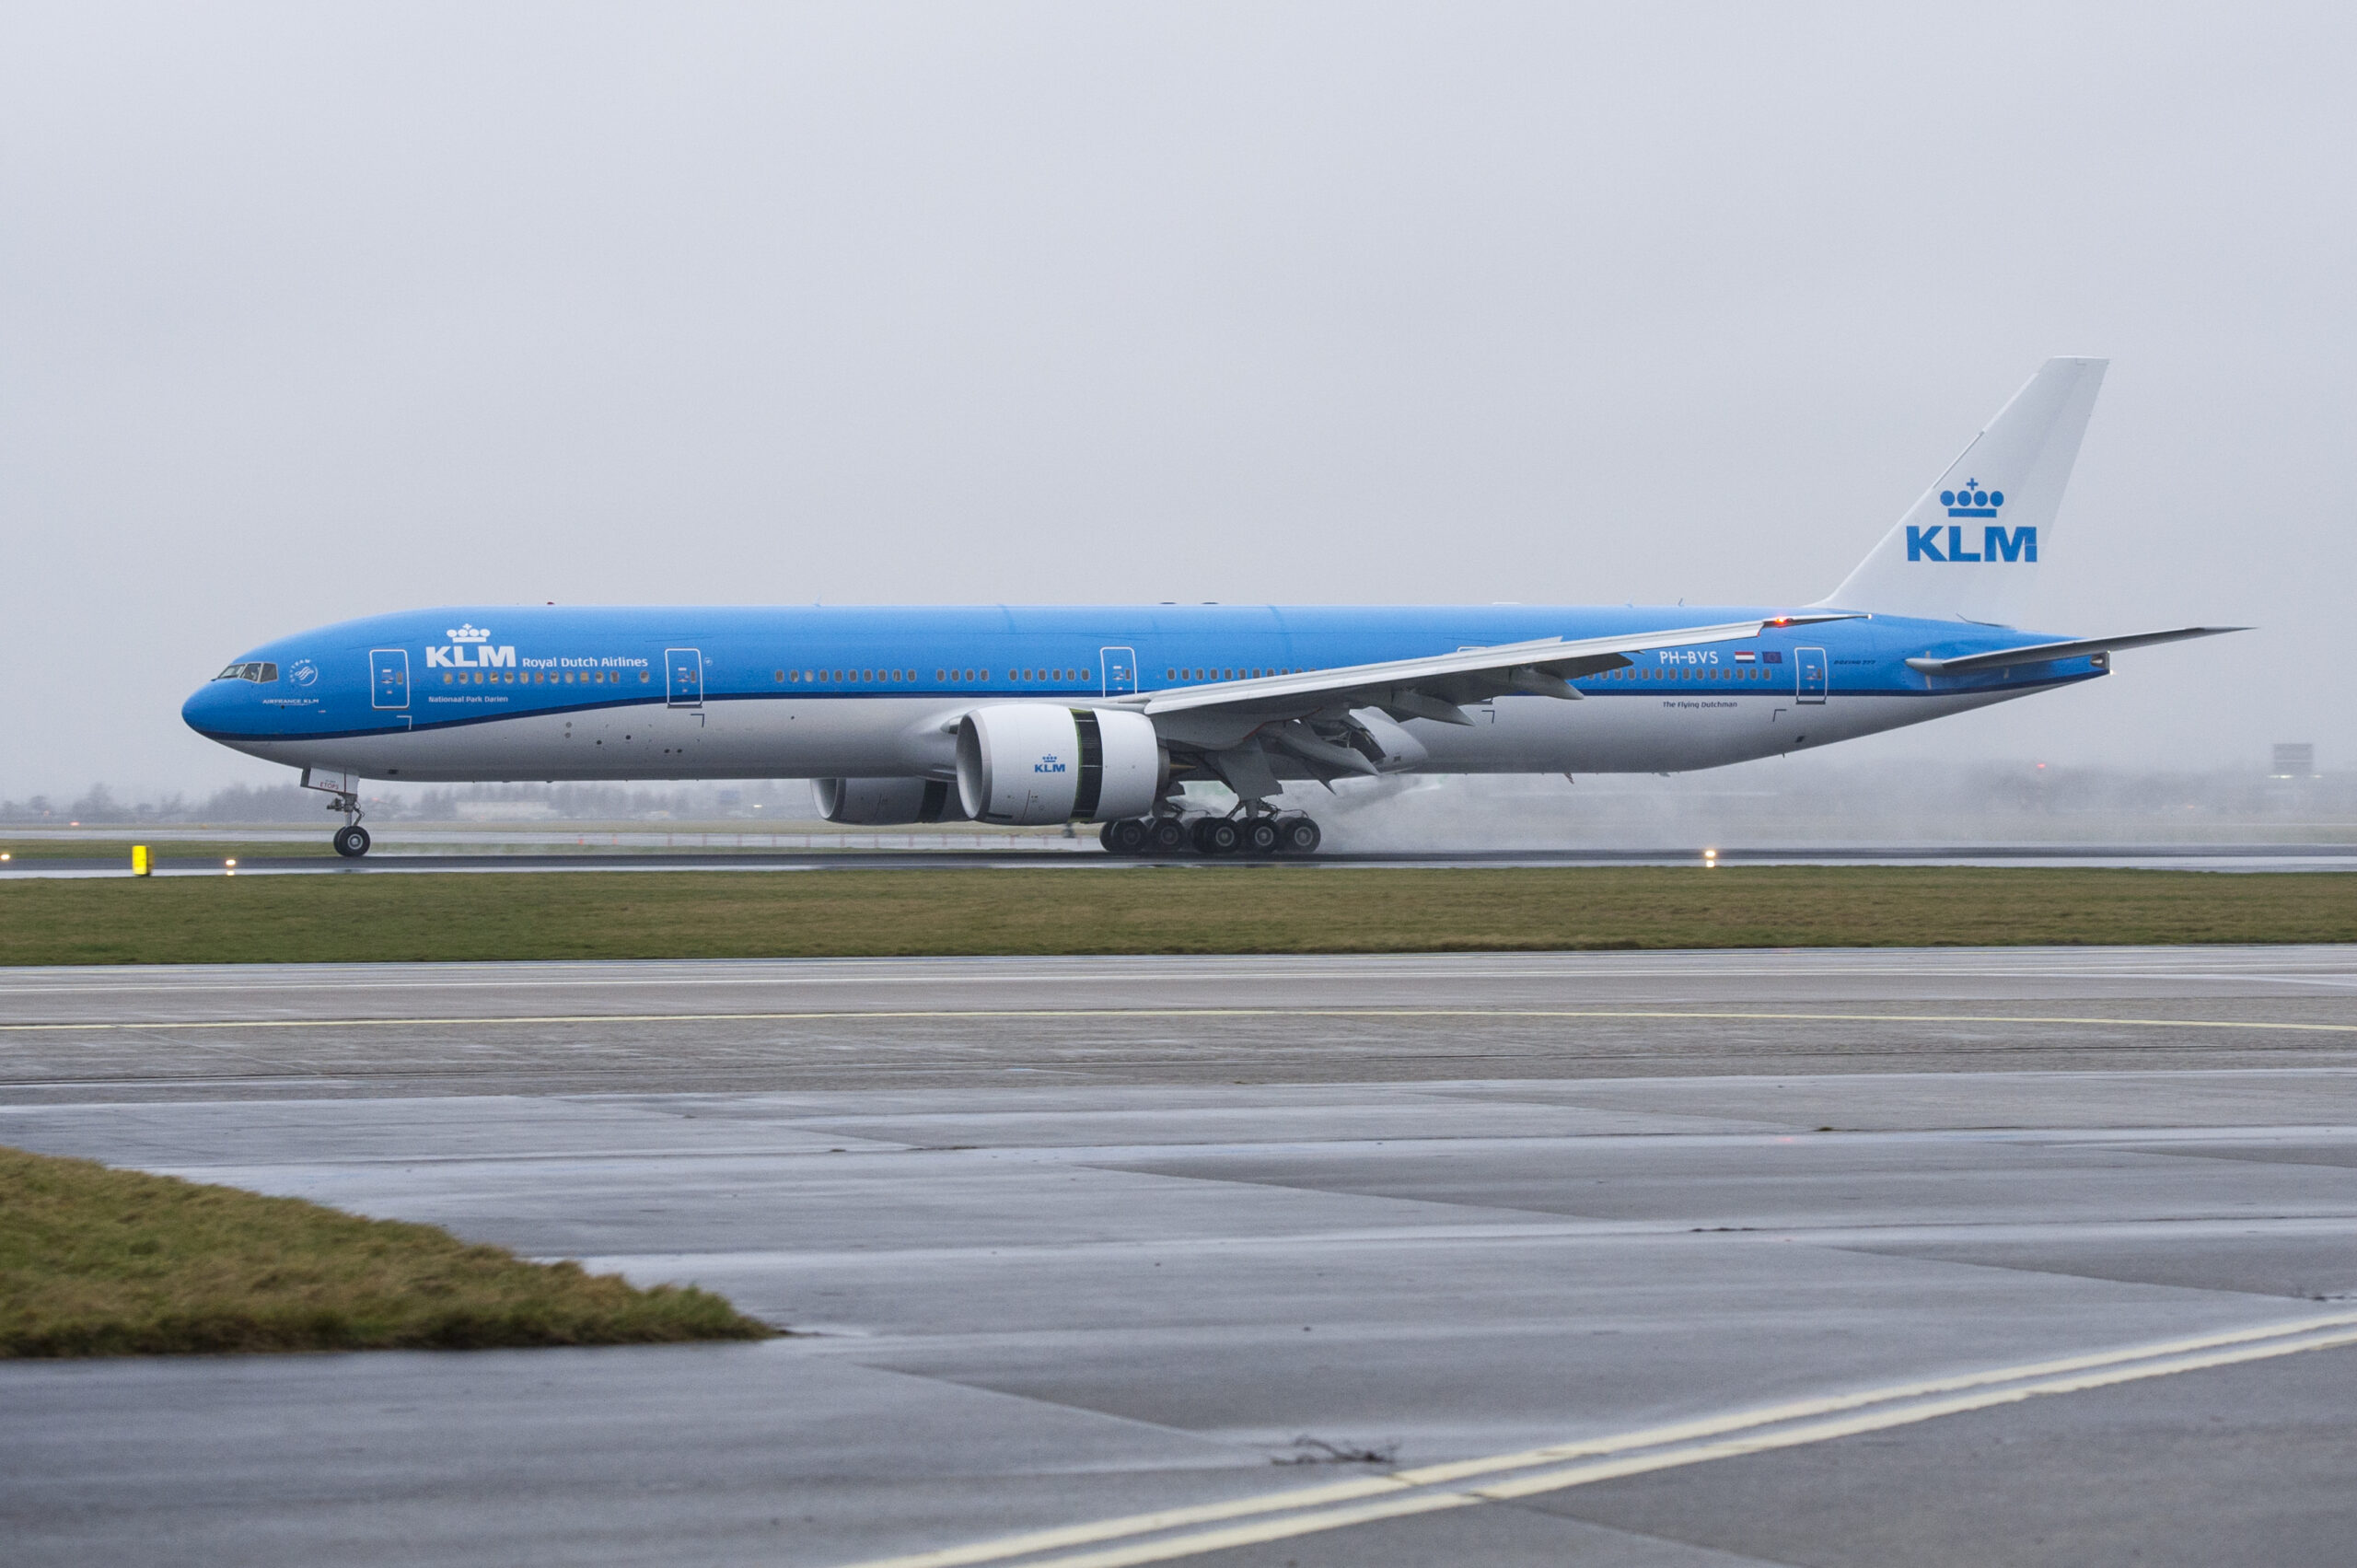 KLM Boeing 777-300 at Amsterdam Airport Schiphol